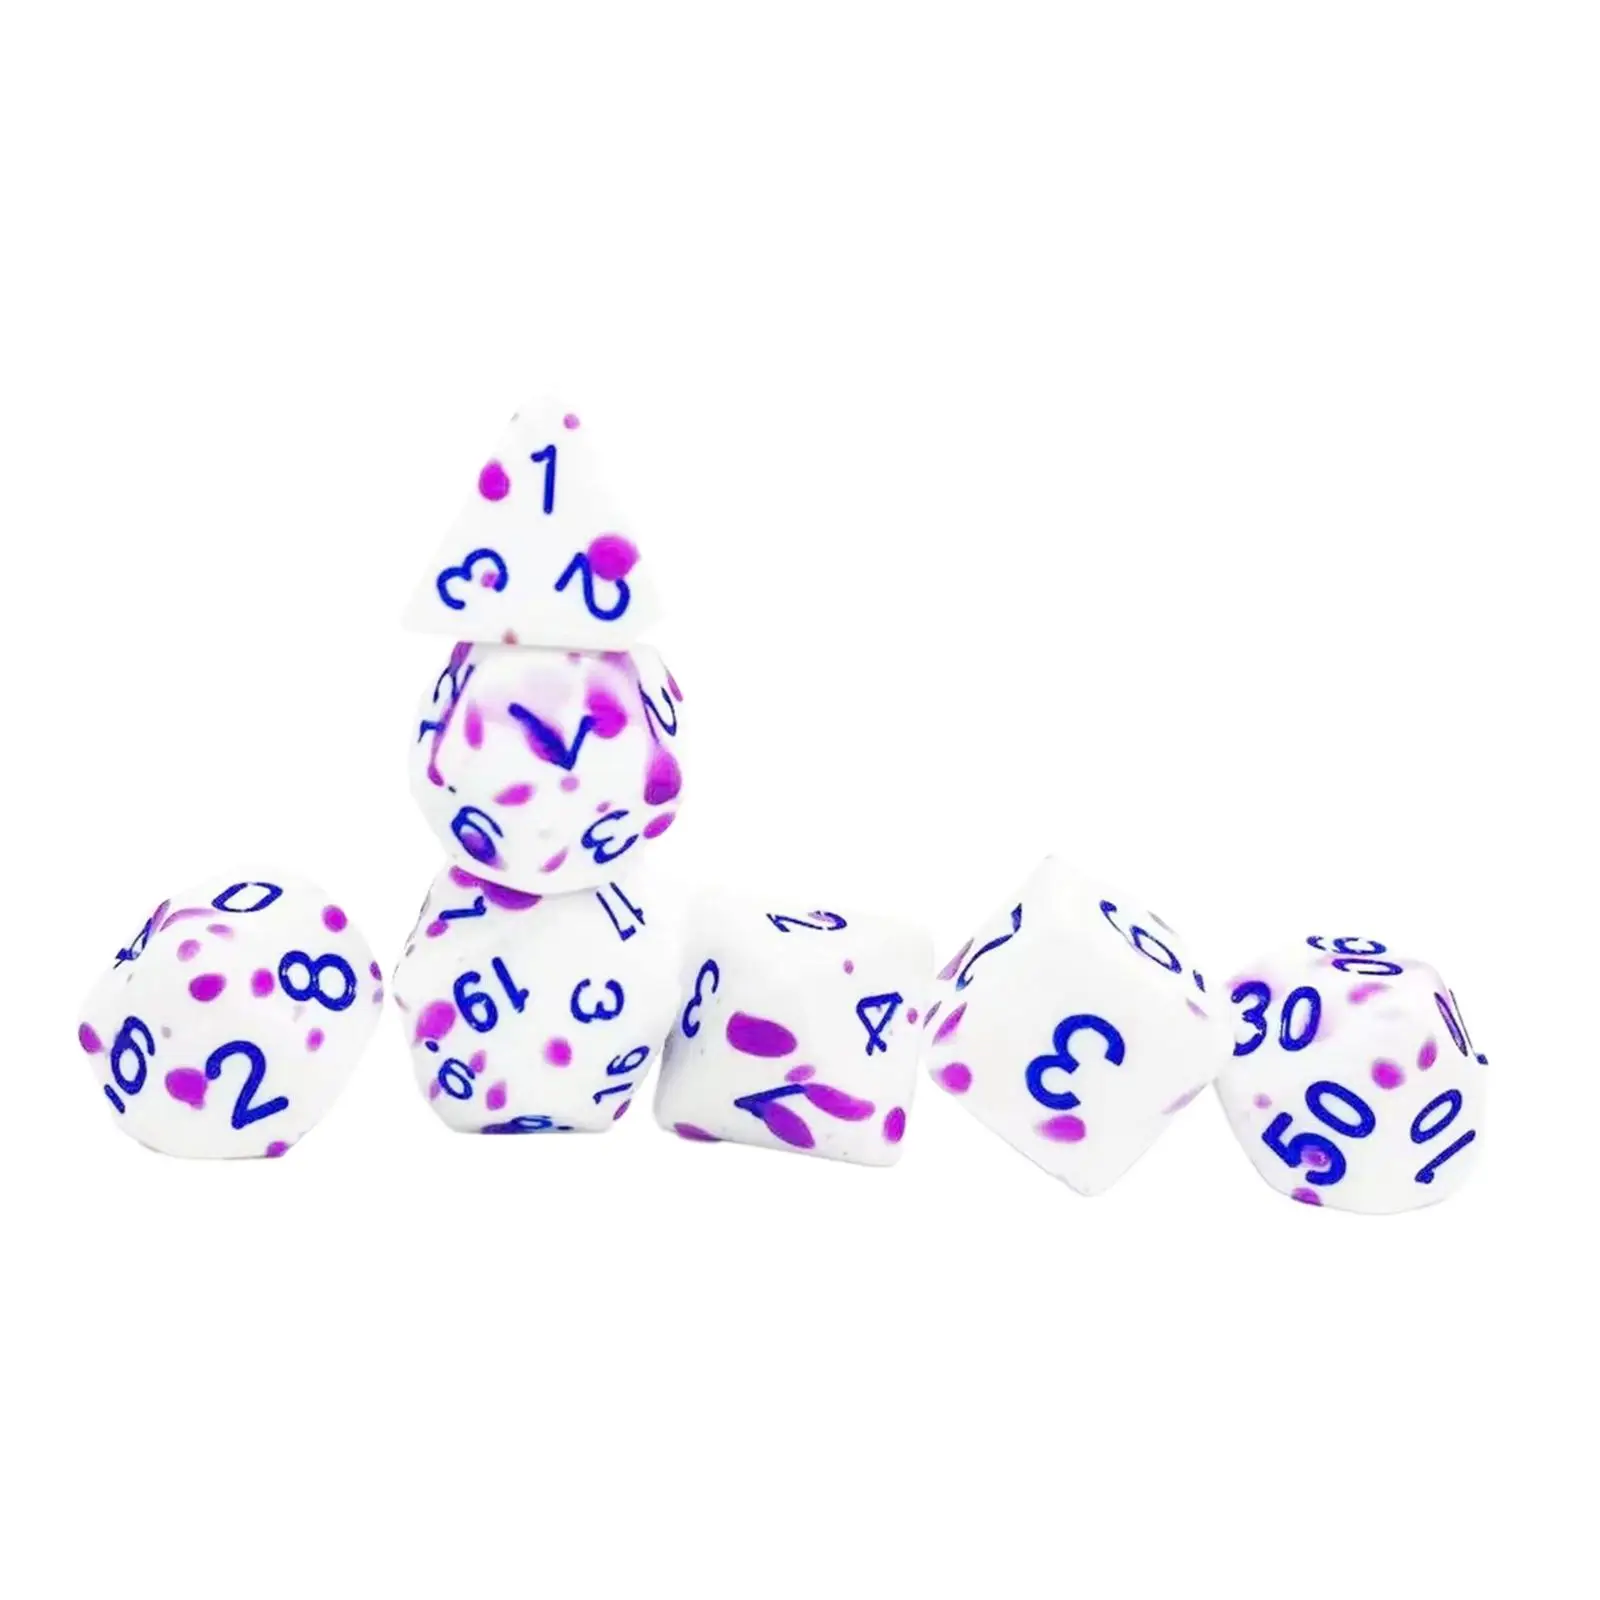 7x Multisided Dice Acrylic Gift Family Gatherings Party Favors Entertainment Toy Role Playing Board Game D4 D6 D8 D10 D12 D20